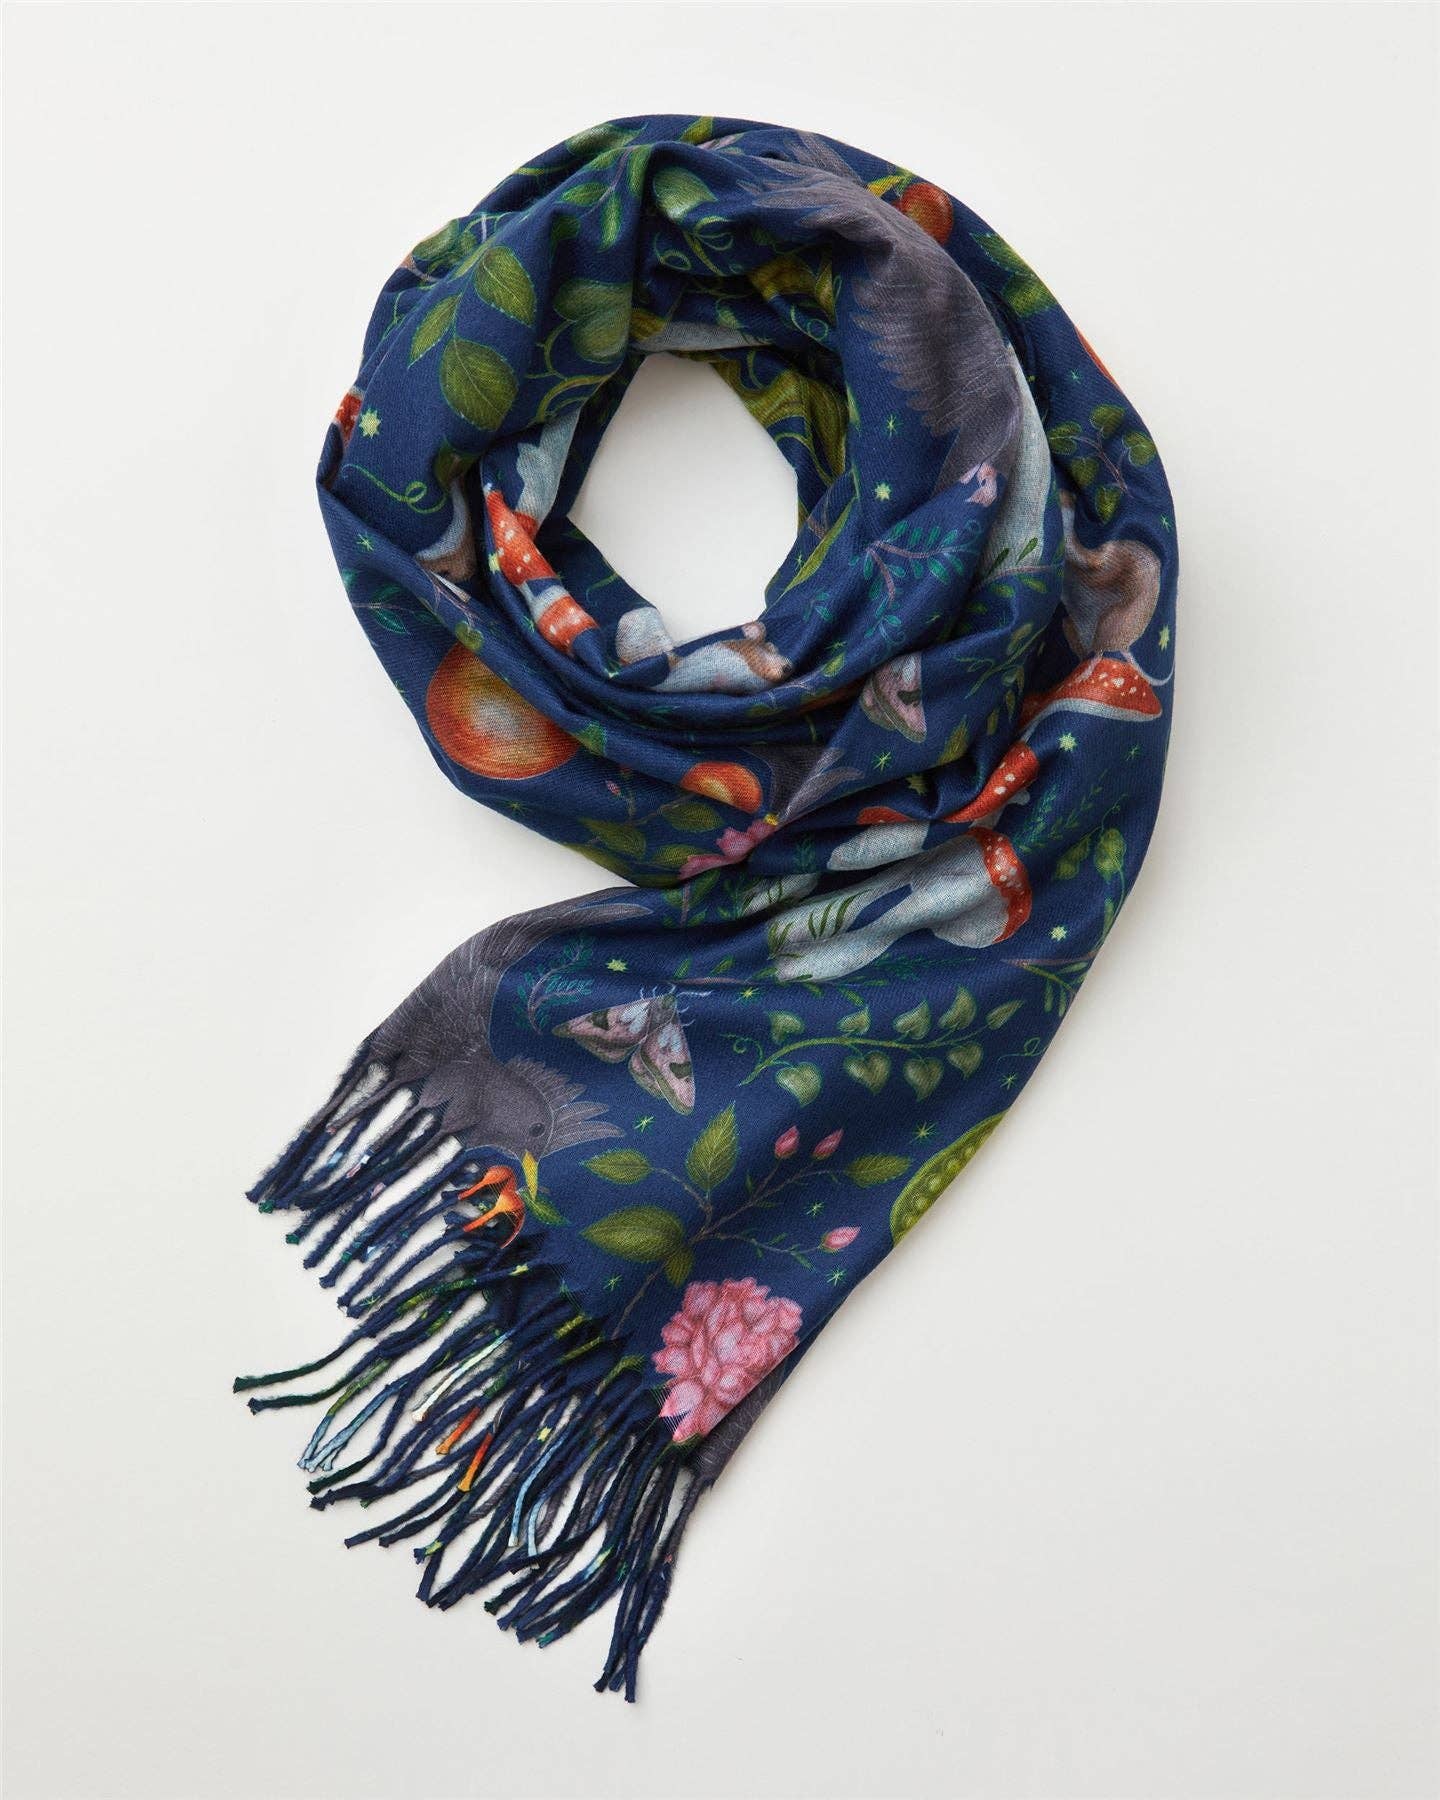 Fable England where to buy. Enniskillen Shopping Centre. Catherine Rowe's Into The Woods Scarf in blue